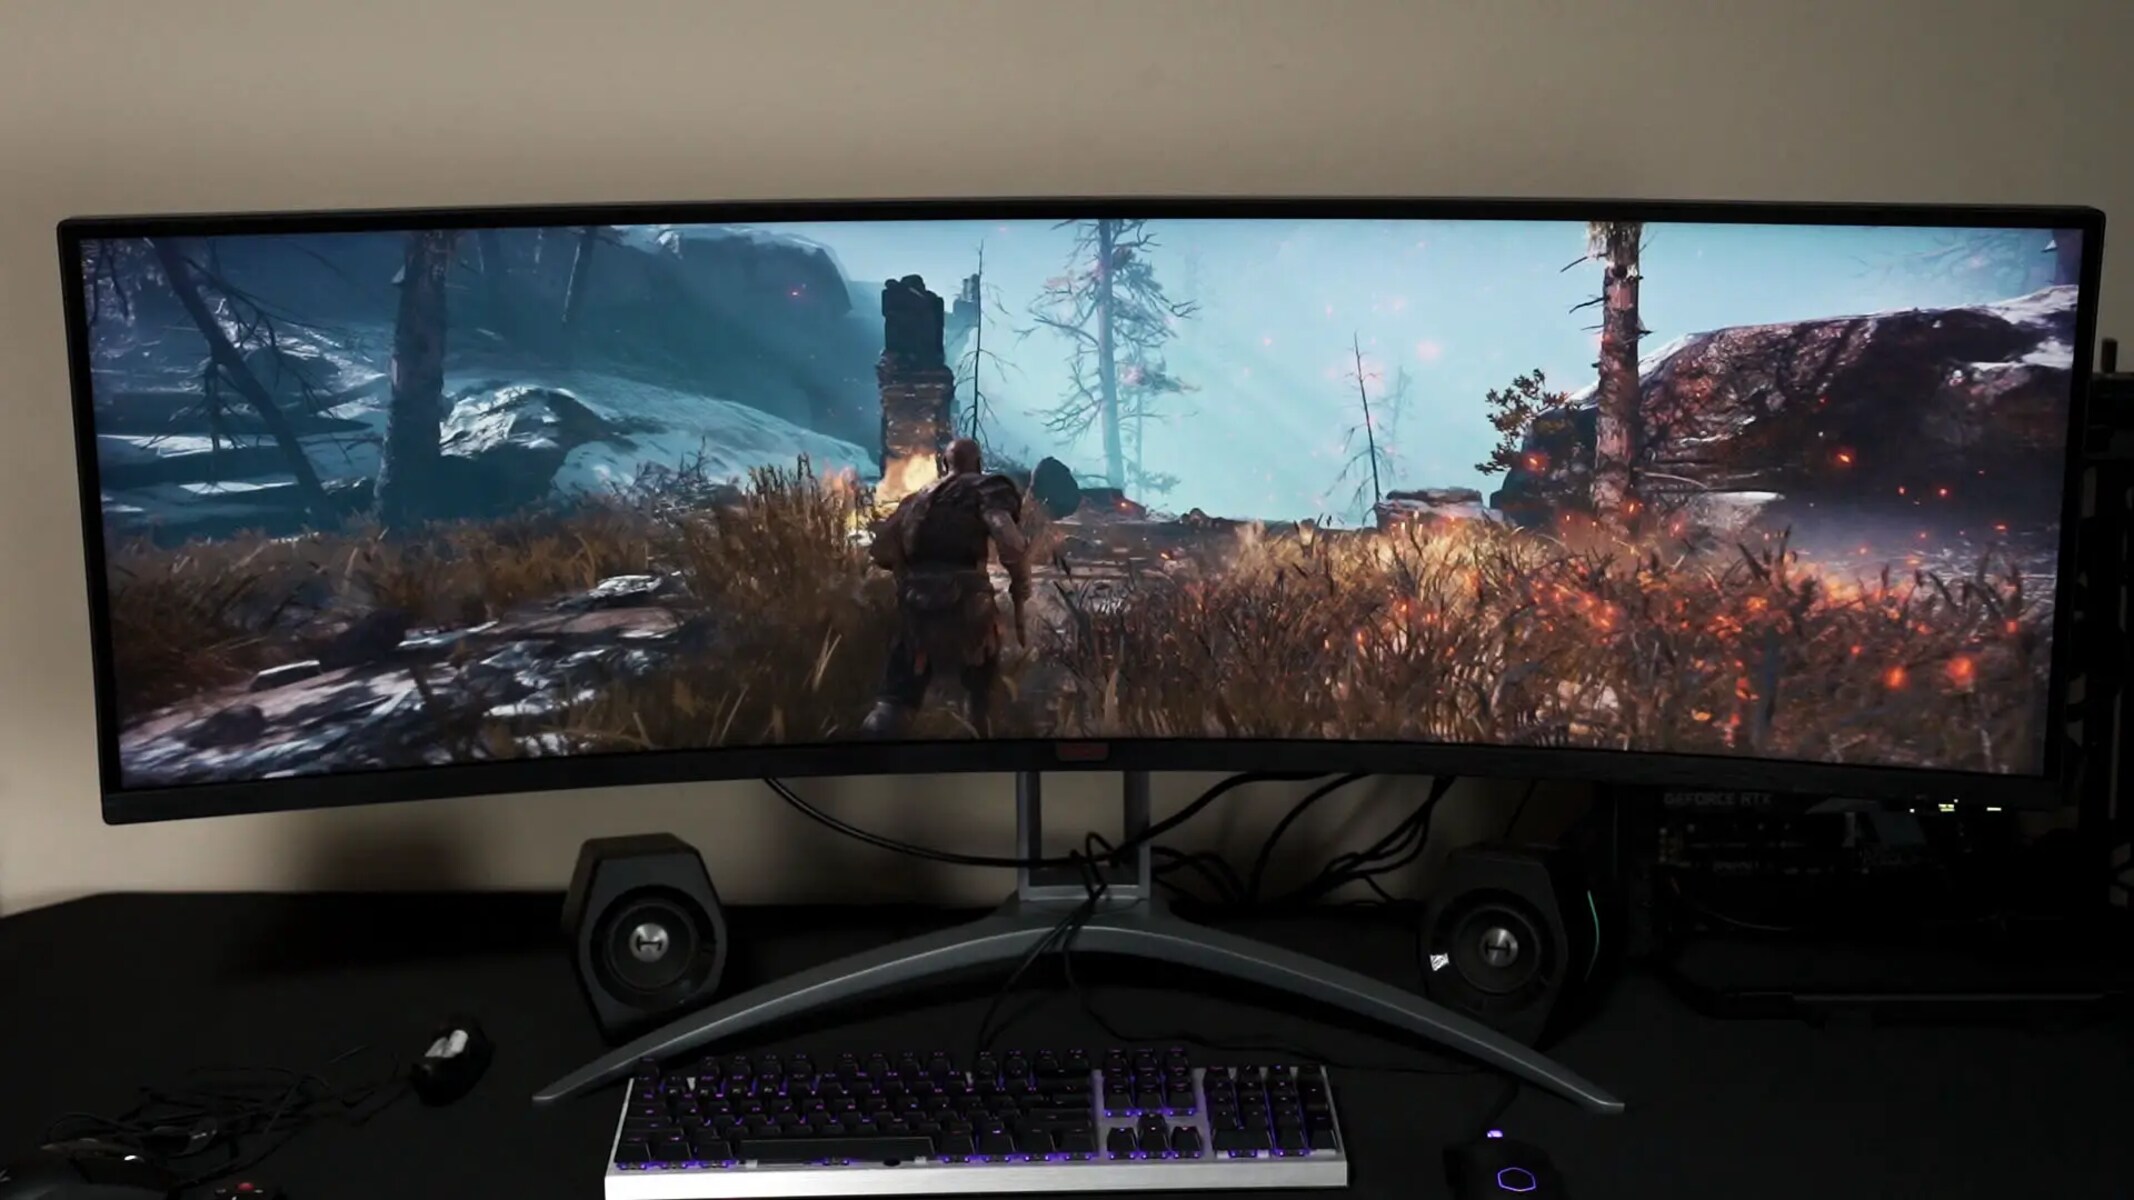 What Graphics Card Do I Need To Get For 144FPS On BenQ XR3501 35 Ultra-Wide Curved VA Gaming Monitor?